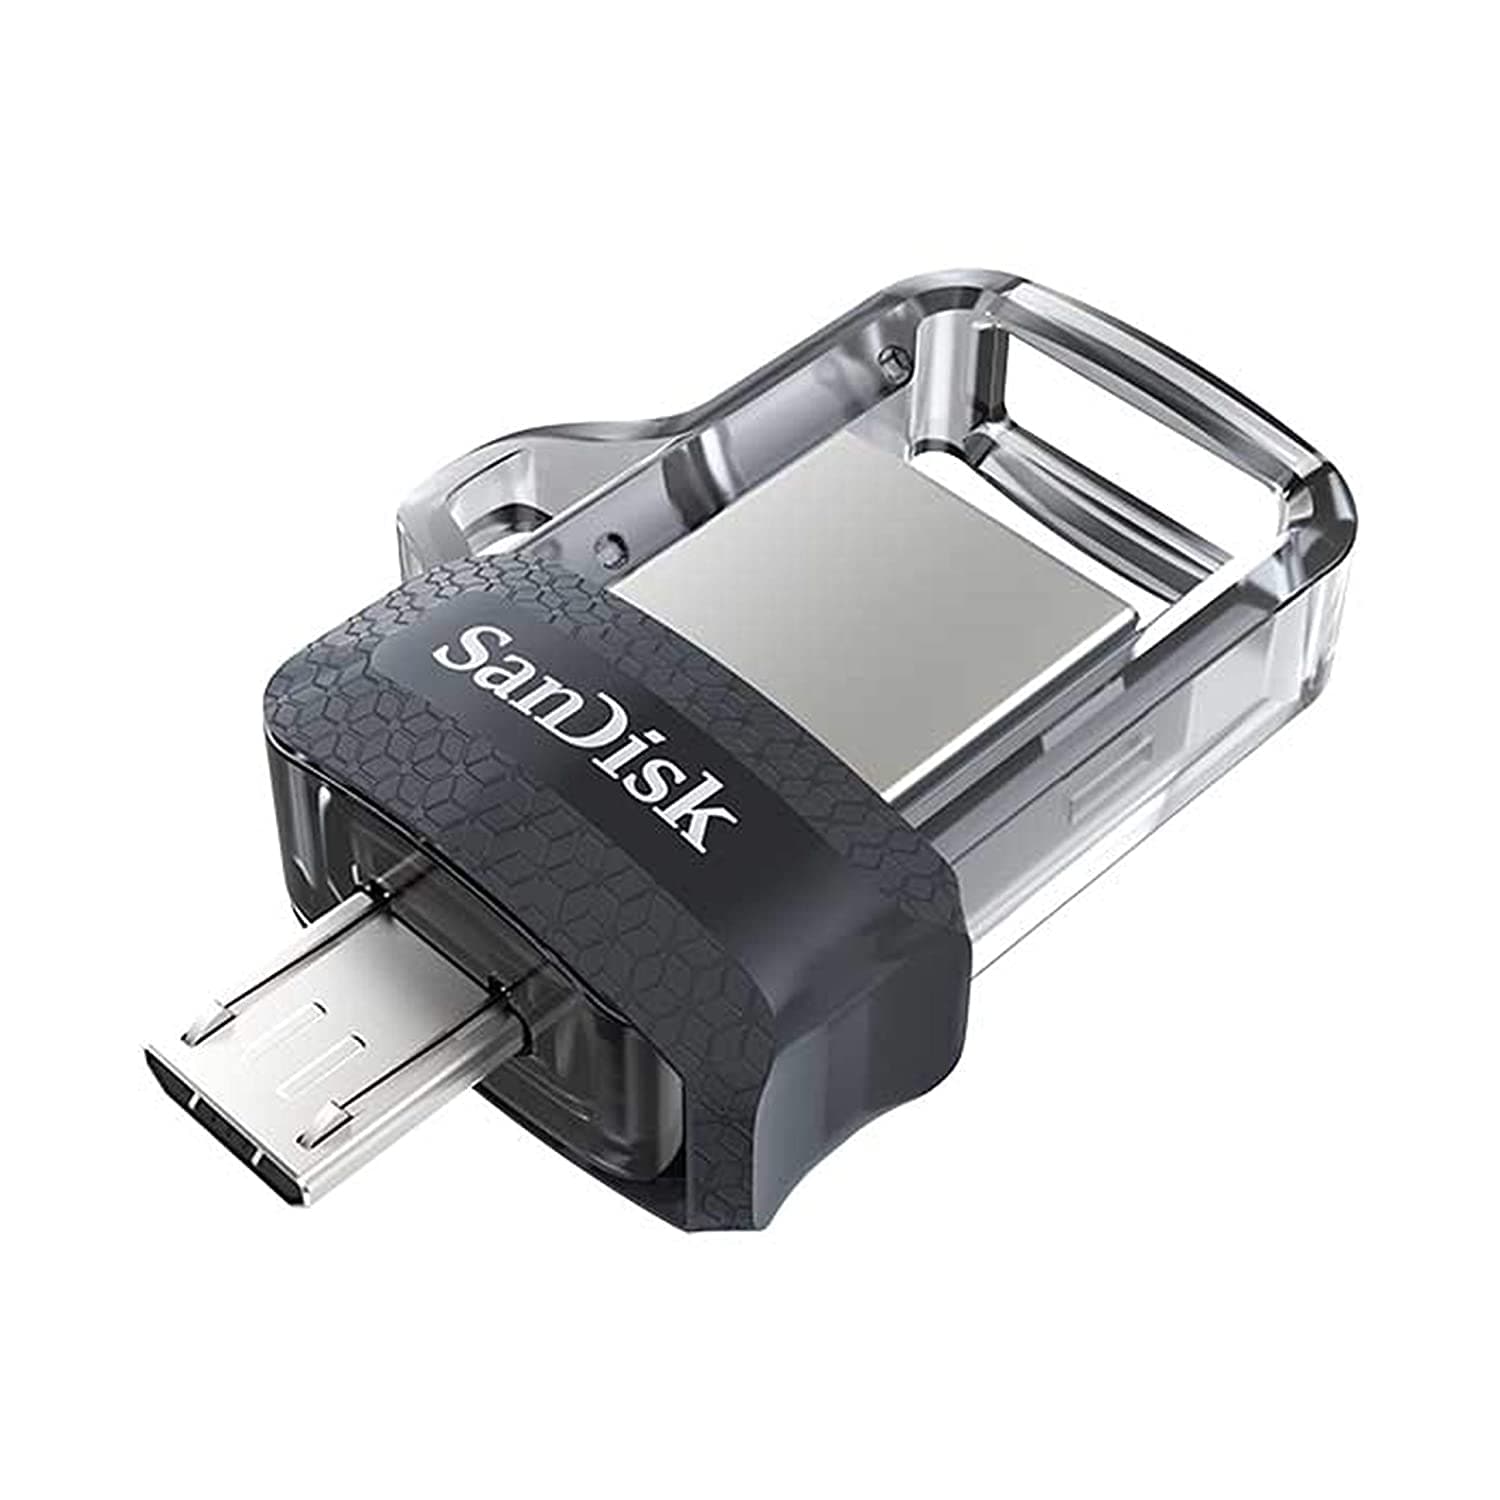 Pen Drives: Buy Pen Drives at Best Prices Online - www